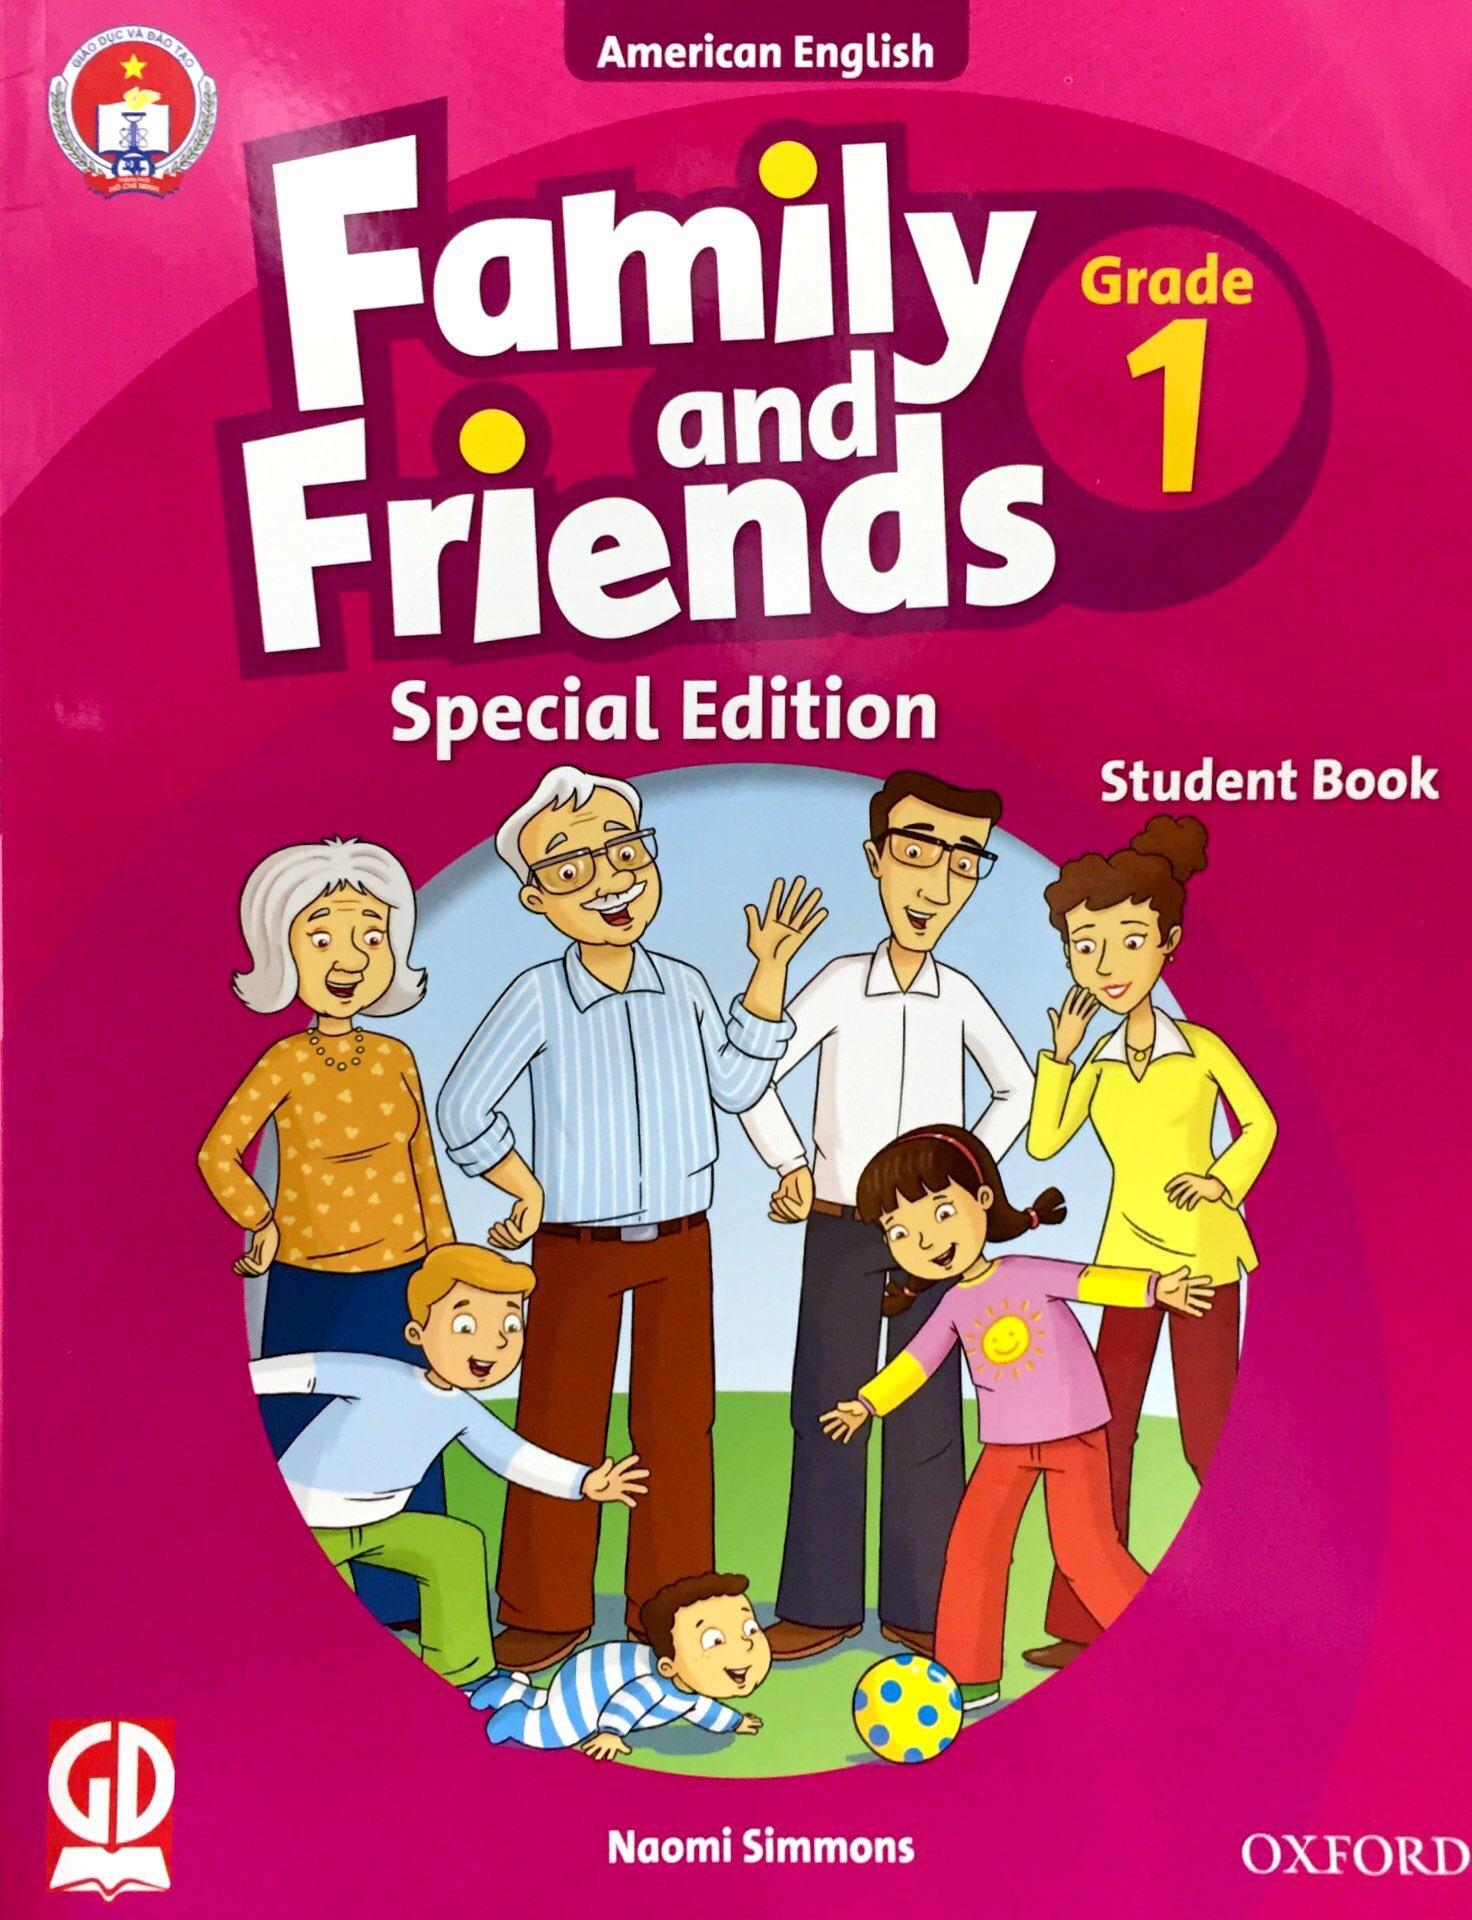 Books and friends. Family and friends (1-е издание). Книга Фэмили энд френдс 1. Family and friends 1 Special Edition. Английский Family and friends.